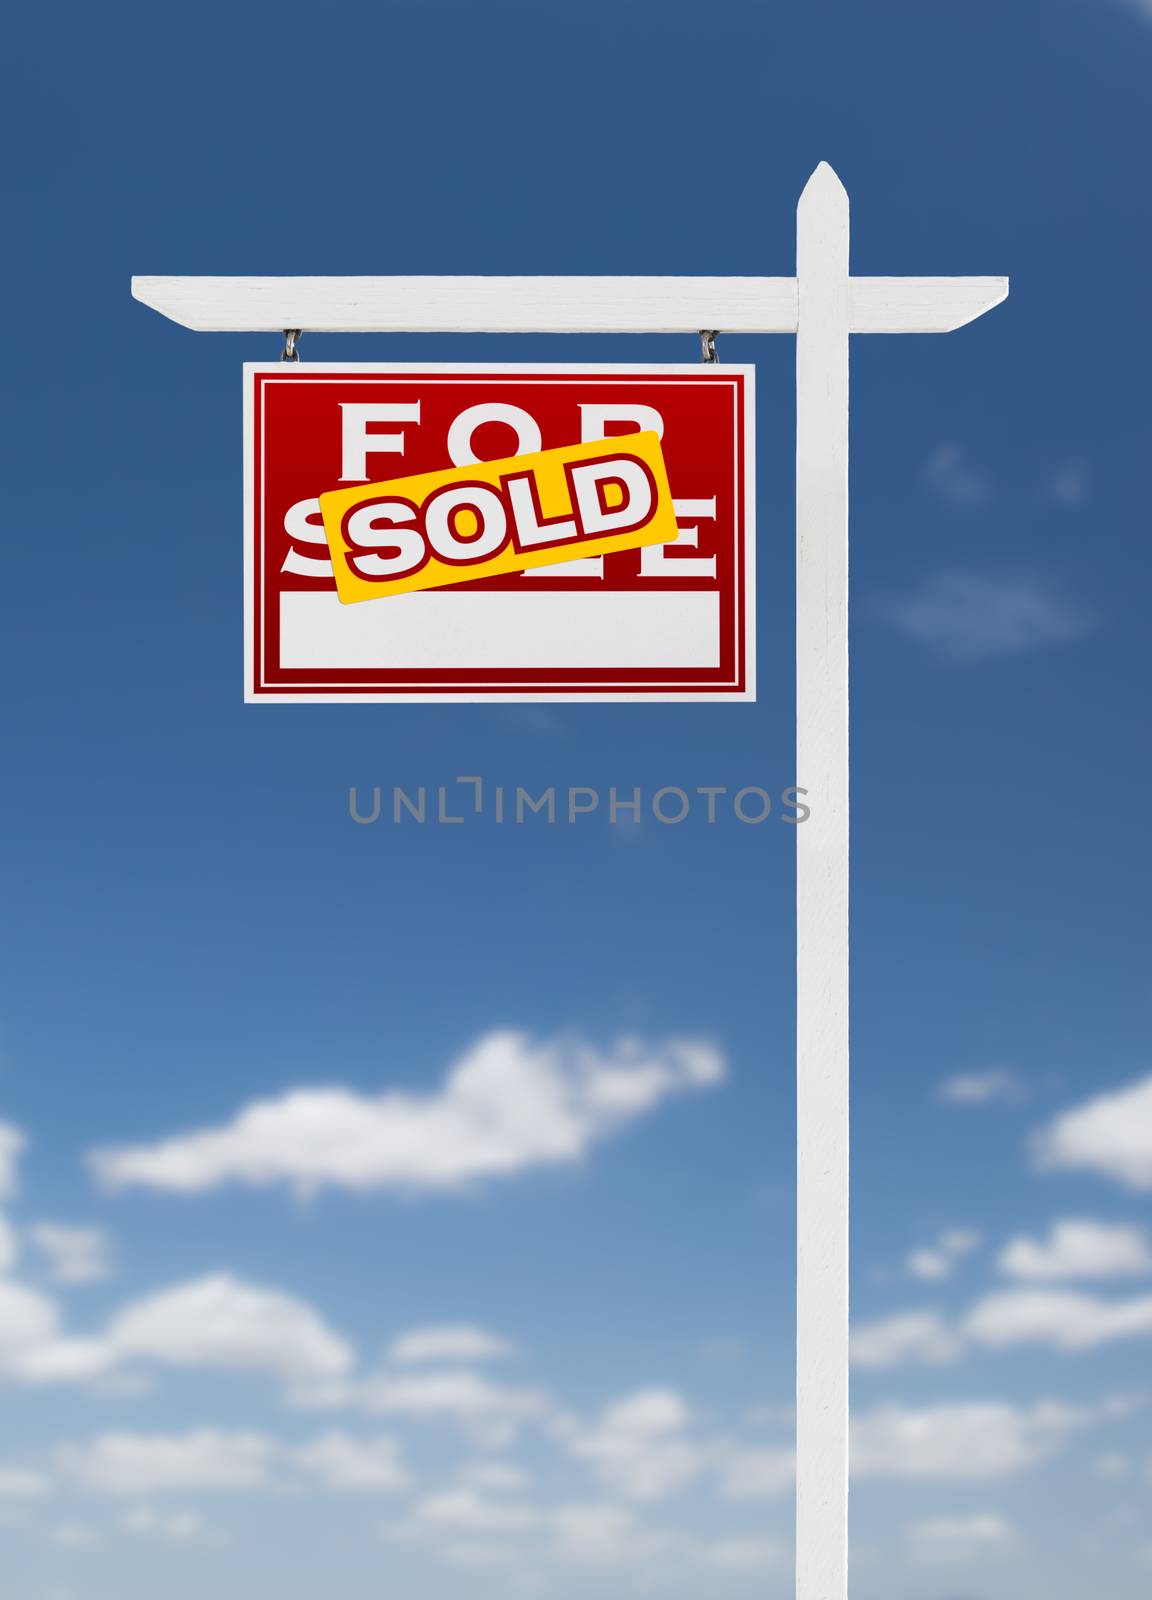 Left Facing Sold For Sale Real Estate Sign on a Blue Sky with Cl by Feverpitched